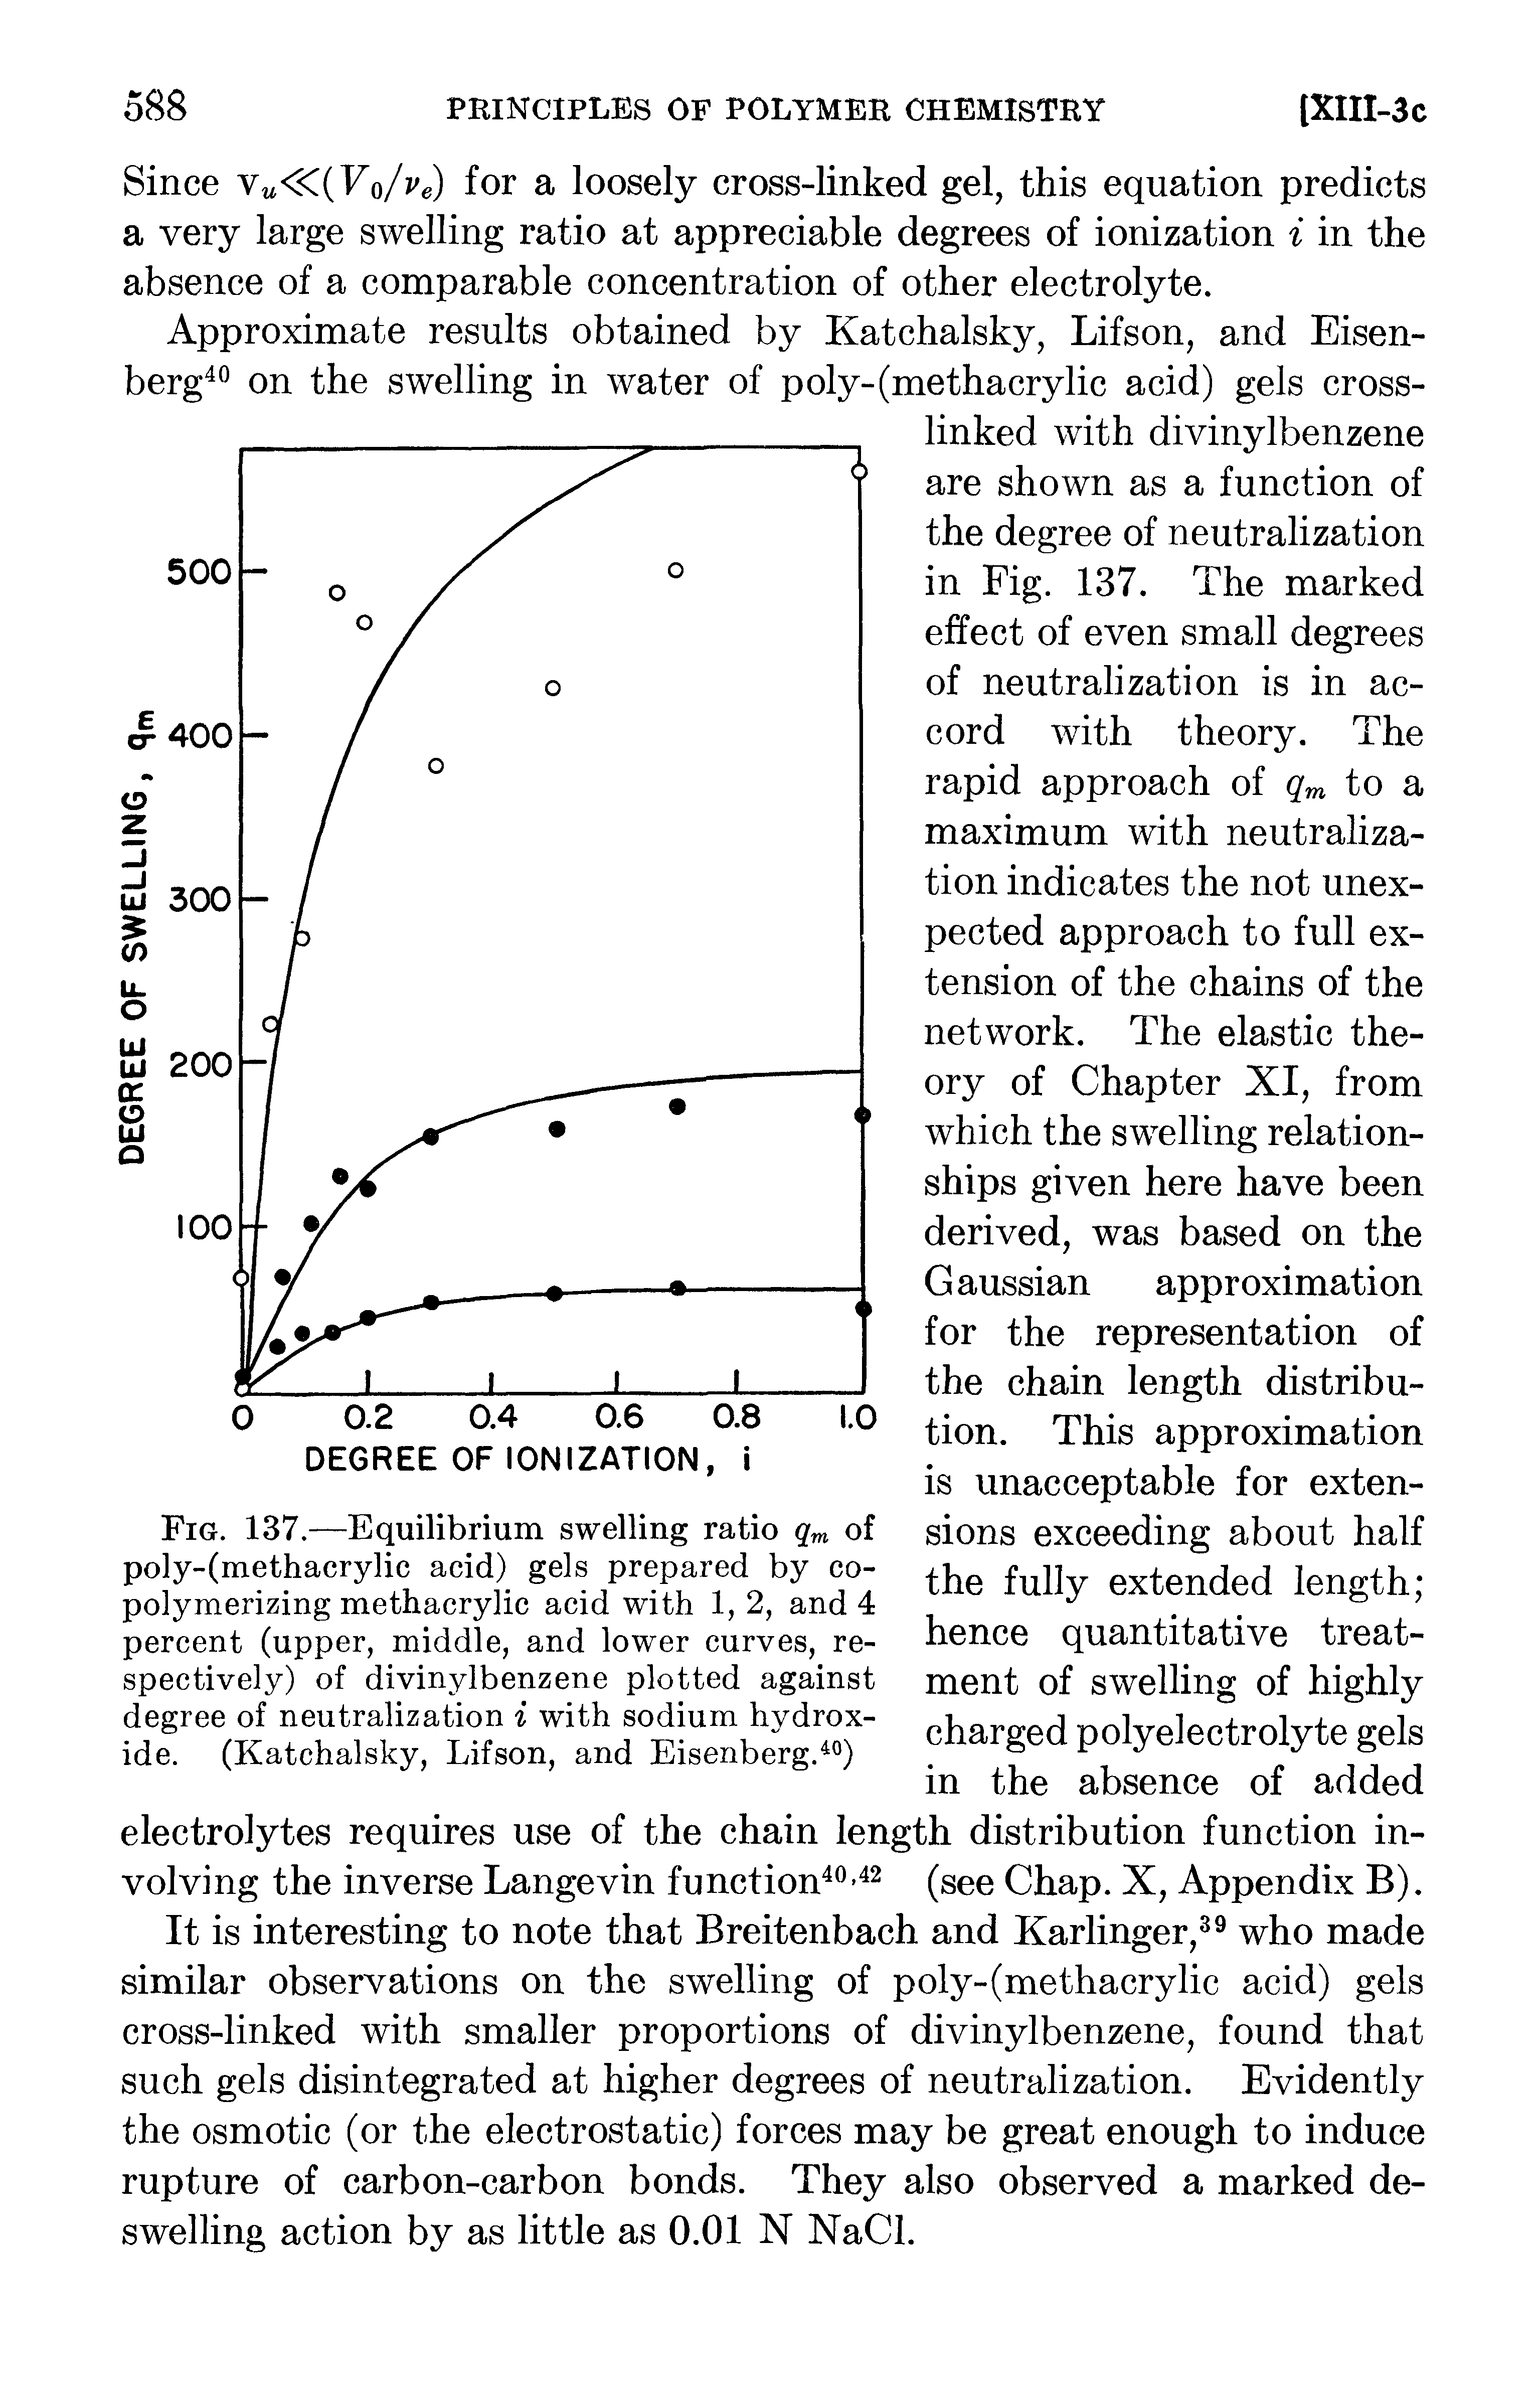 Fig. 137.—Equilibrium swelling ratio qm of poly-(methacrylic acid) gels prepared by copolymerizing methacrylic acid with 1, 2, and 4 percent (upper, middle, and lower curves, respectively) of divinylbenzene plotted against degree of neutralization i with sodium hydroxide. (Katchalsky, Lifson, and Eisenberg. )...